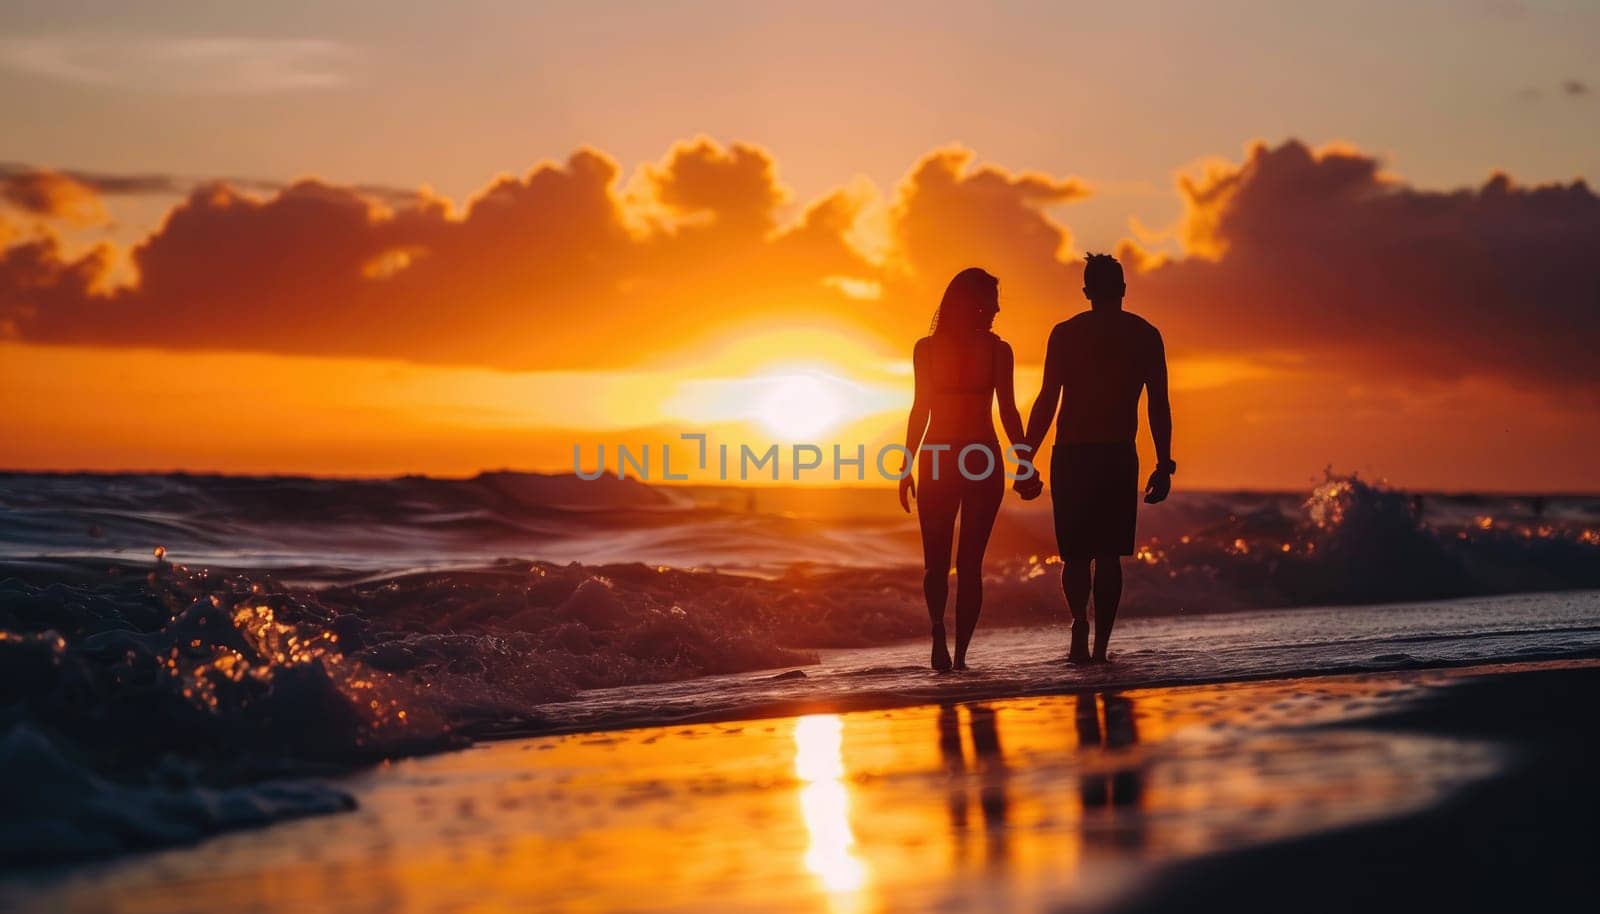 A group of three people are walking on the beach at sunset by AI generated image.